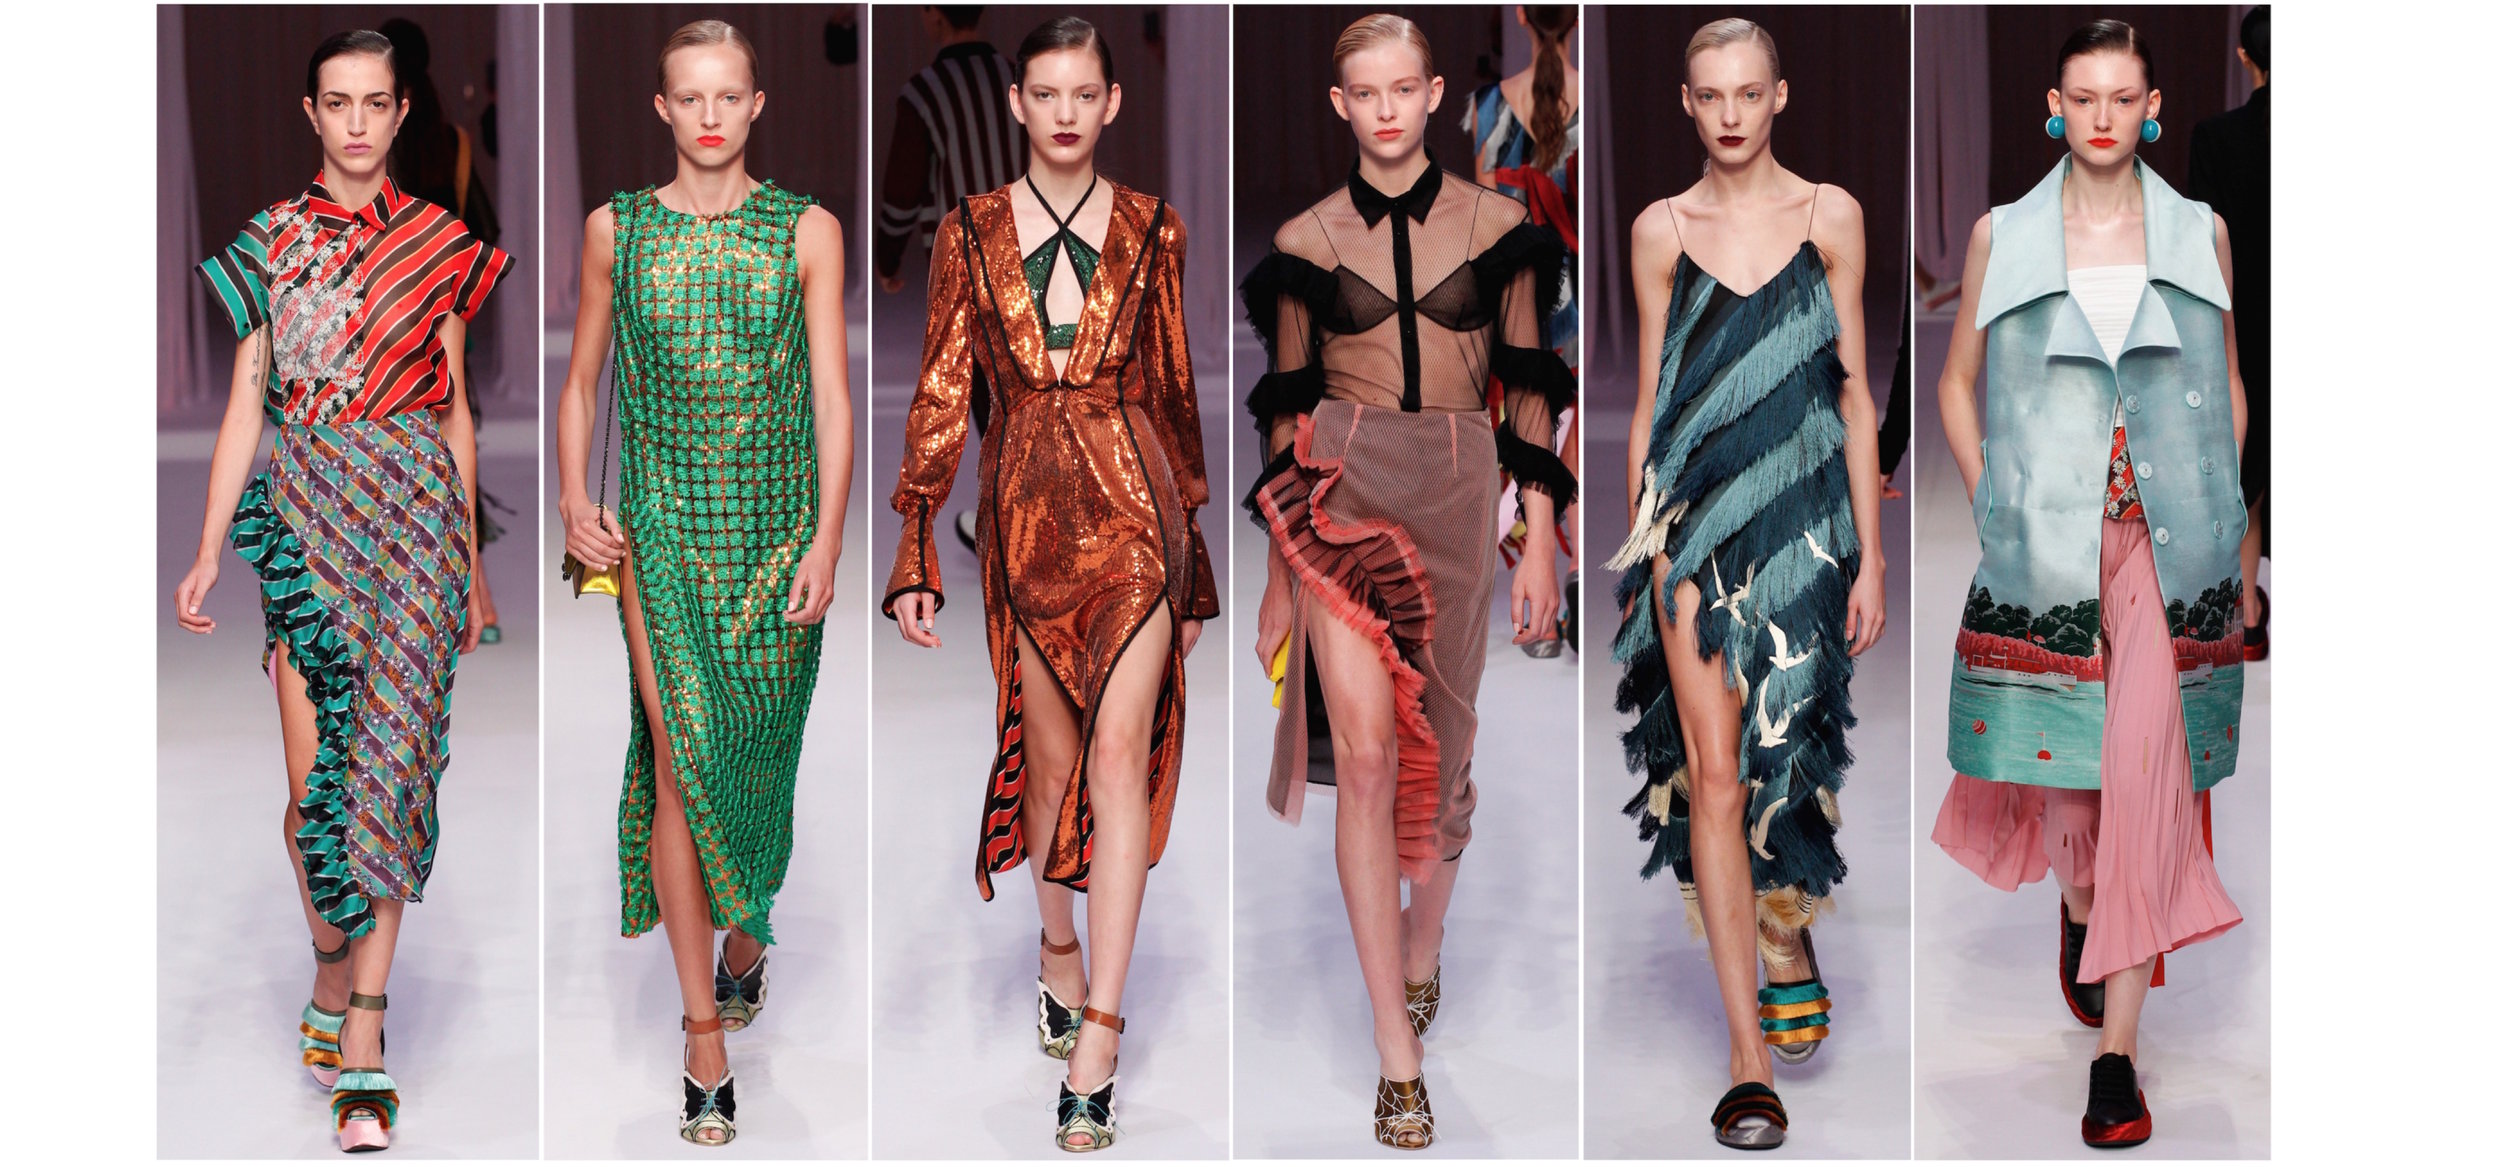   S17 runway collection, courtesy of  vogue.com   